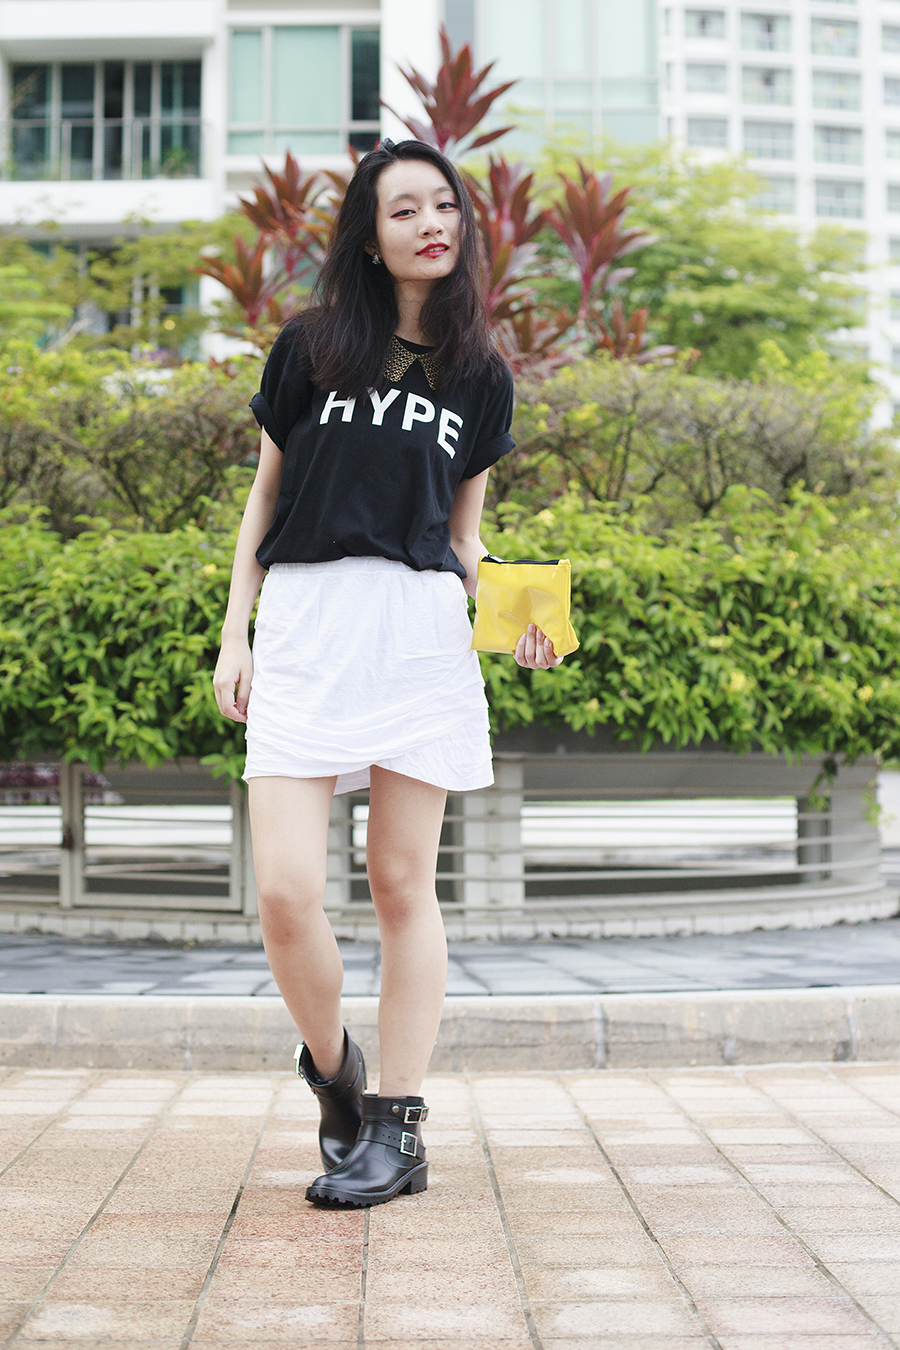 Black & White OOTD details: Black Lookbook.nu Hype tee, white Monrow Basic Shirred Skirt via Shopbop, gold Forever 21 chain collar necklace, black Dav Liverpool Rain Booties via Shopbop, yellow cosmetic pouch from clozette.